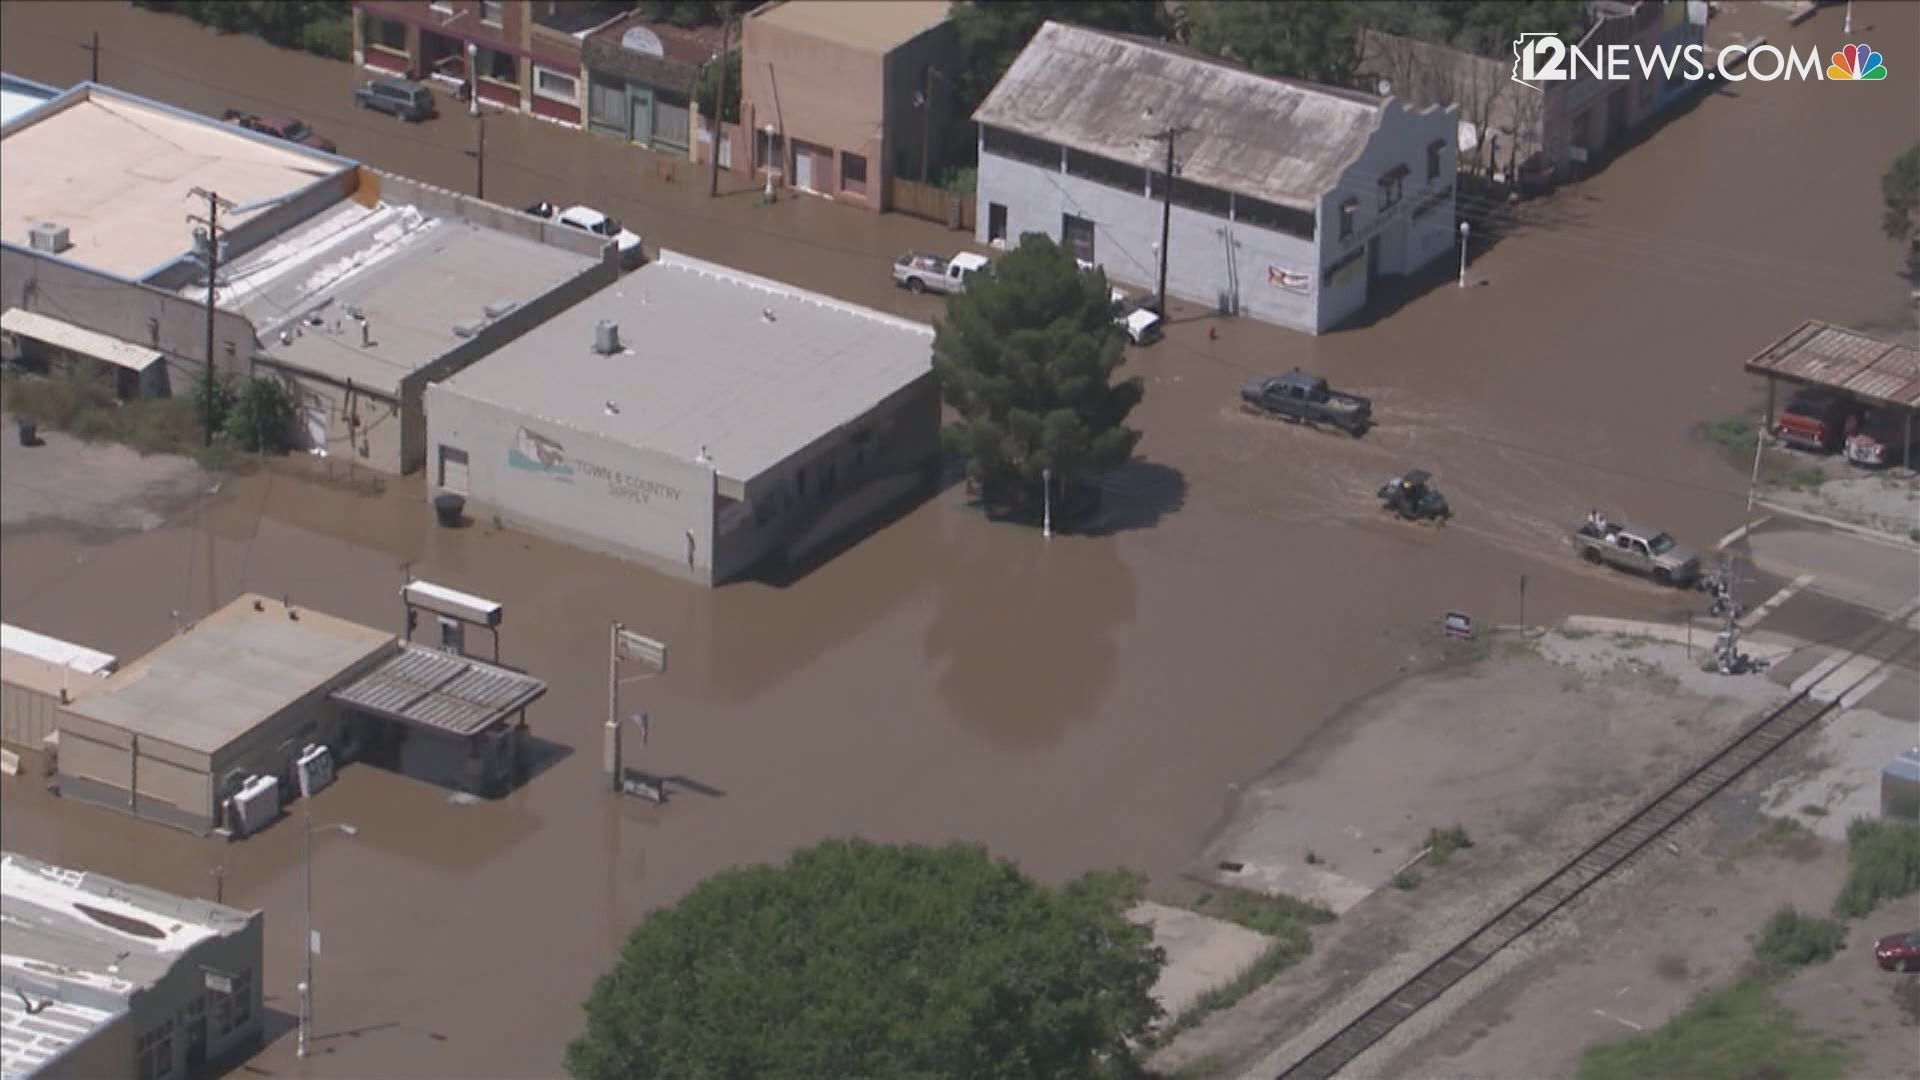 Water levels in the Gila River reached "major flood stage" Sunday according to officials. Sky 12 was over Duncan, Arizona where evacuations took place Monday.